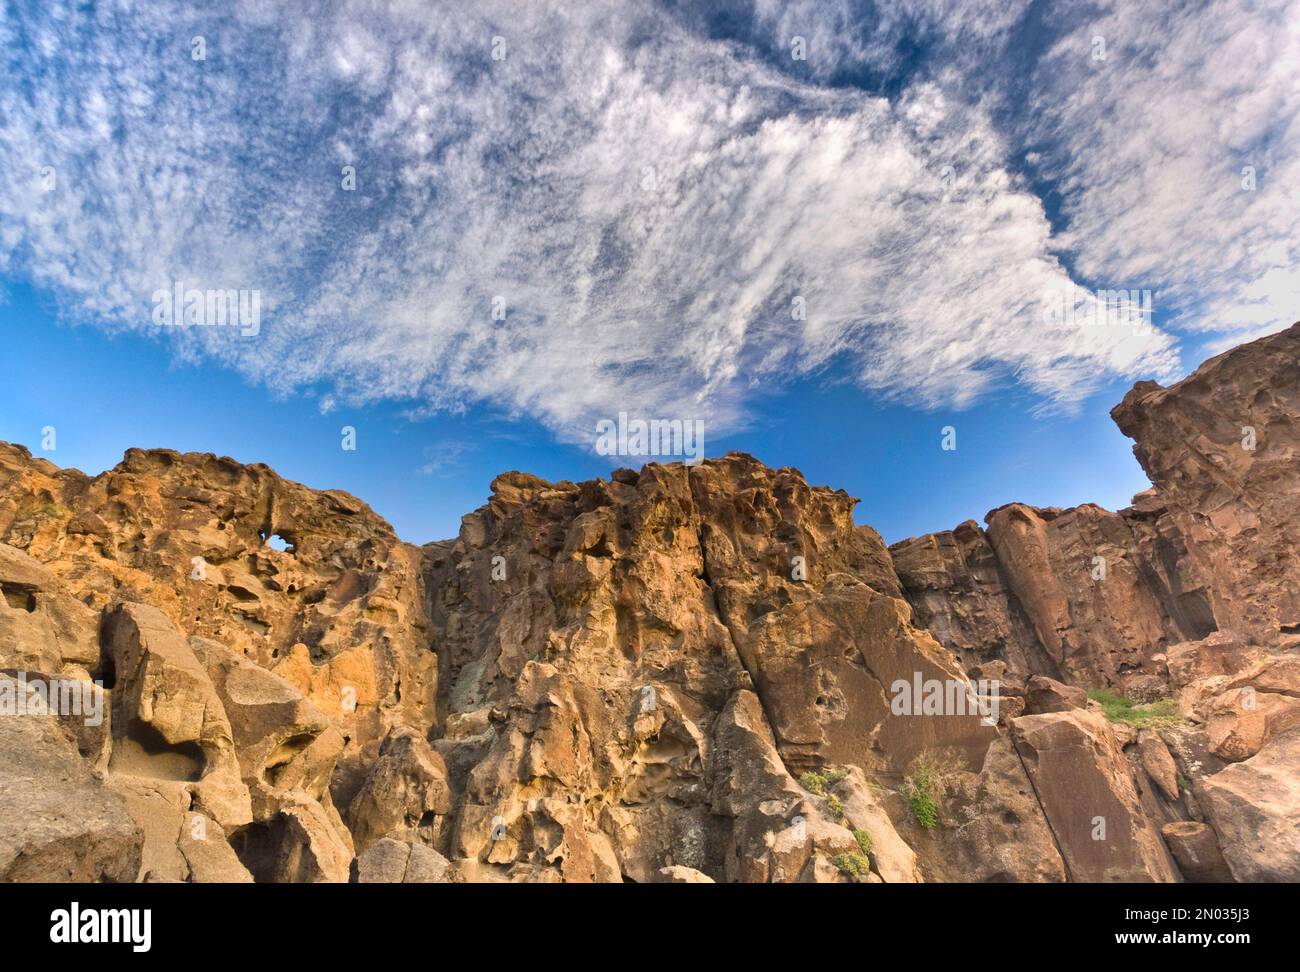 Cirrocumulus and cirrus herringbone clouds over Hole-in-the-Wall rocks at Mojave National Preserve, California, USA Stock Photo